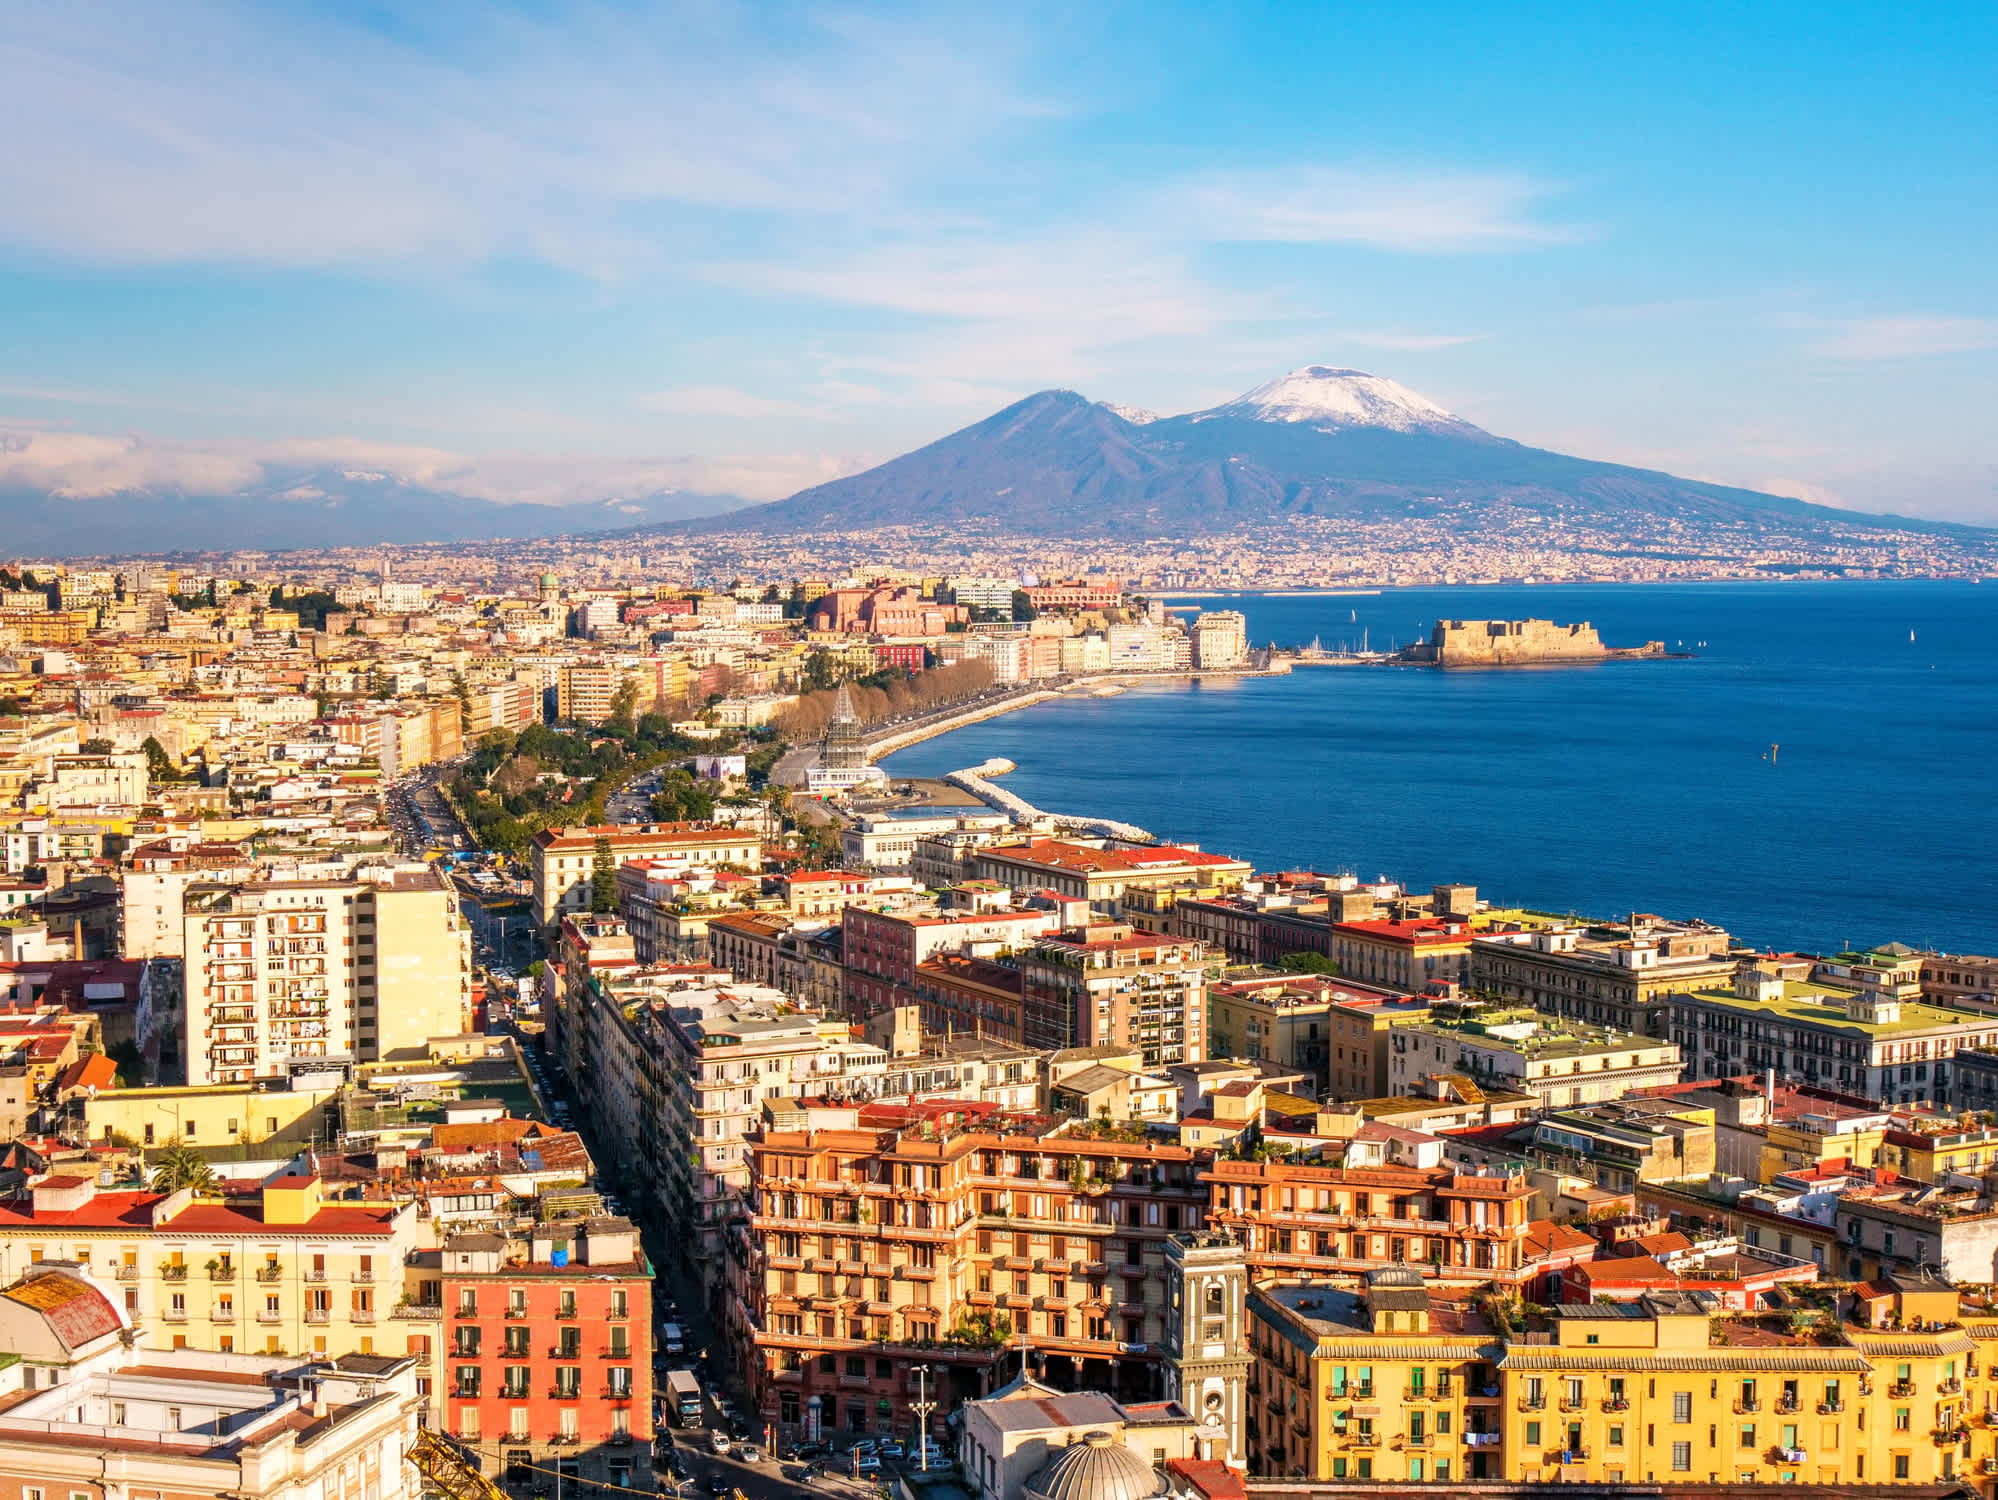 See Naples from above Naples, with the unusually snowy Vesuvius volcano in the background, on a Naples vacation